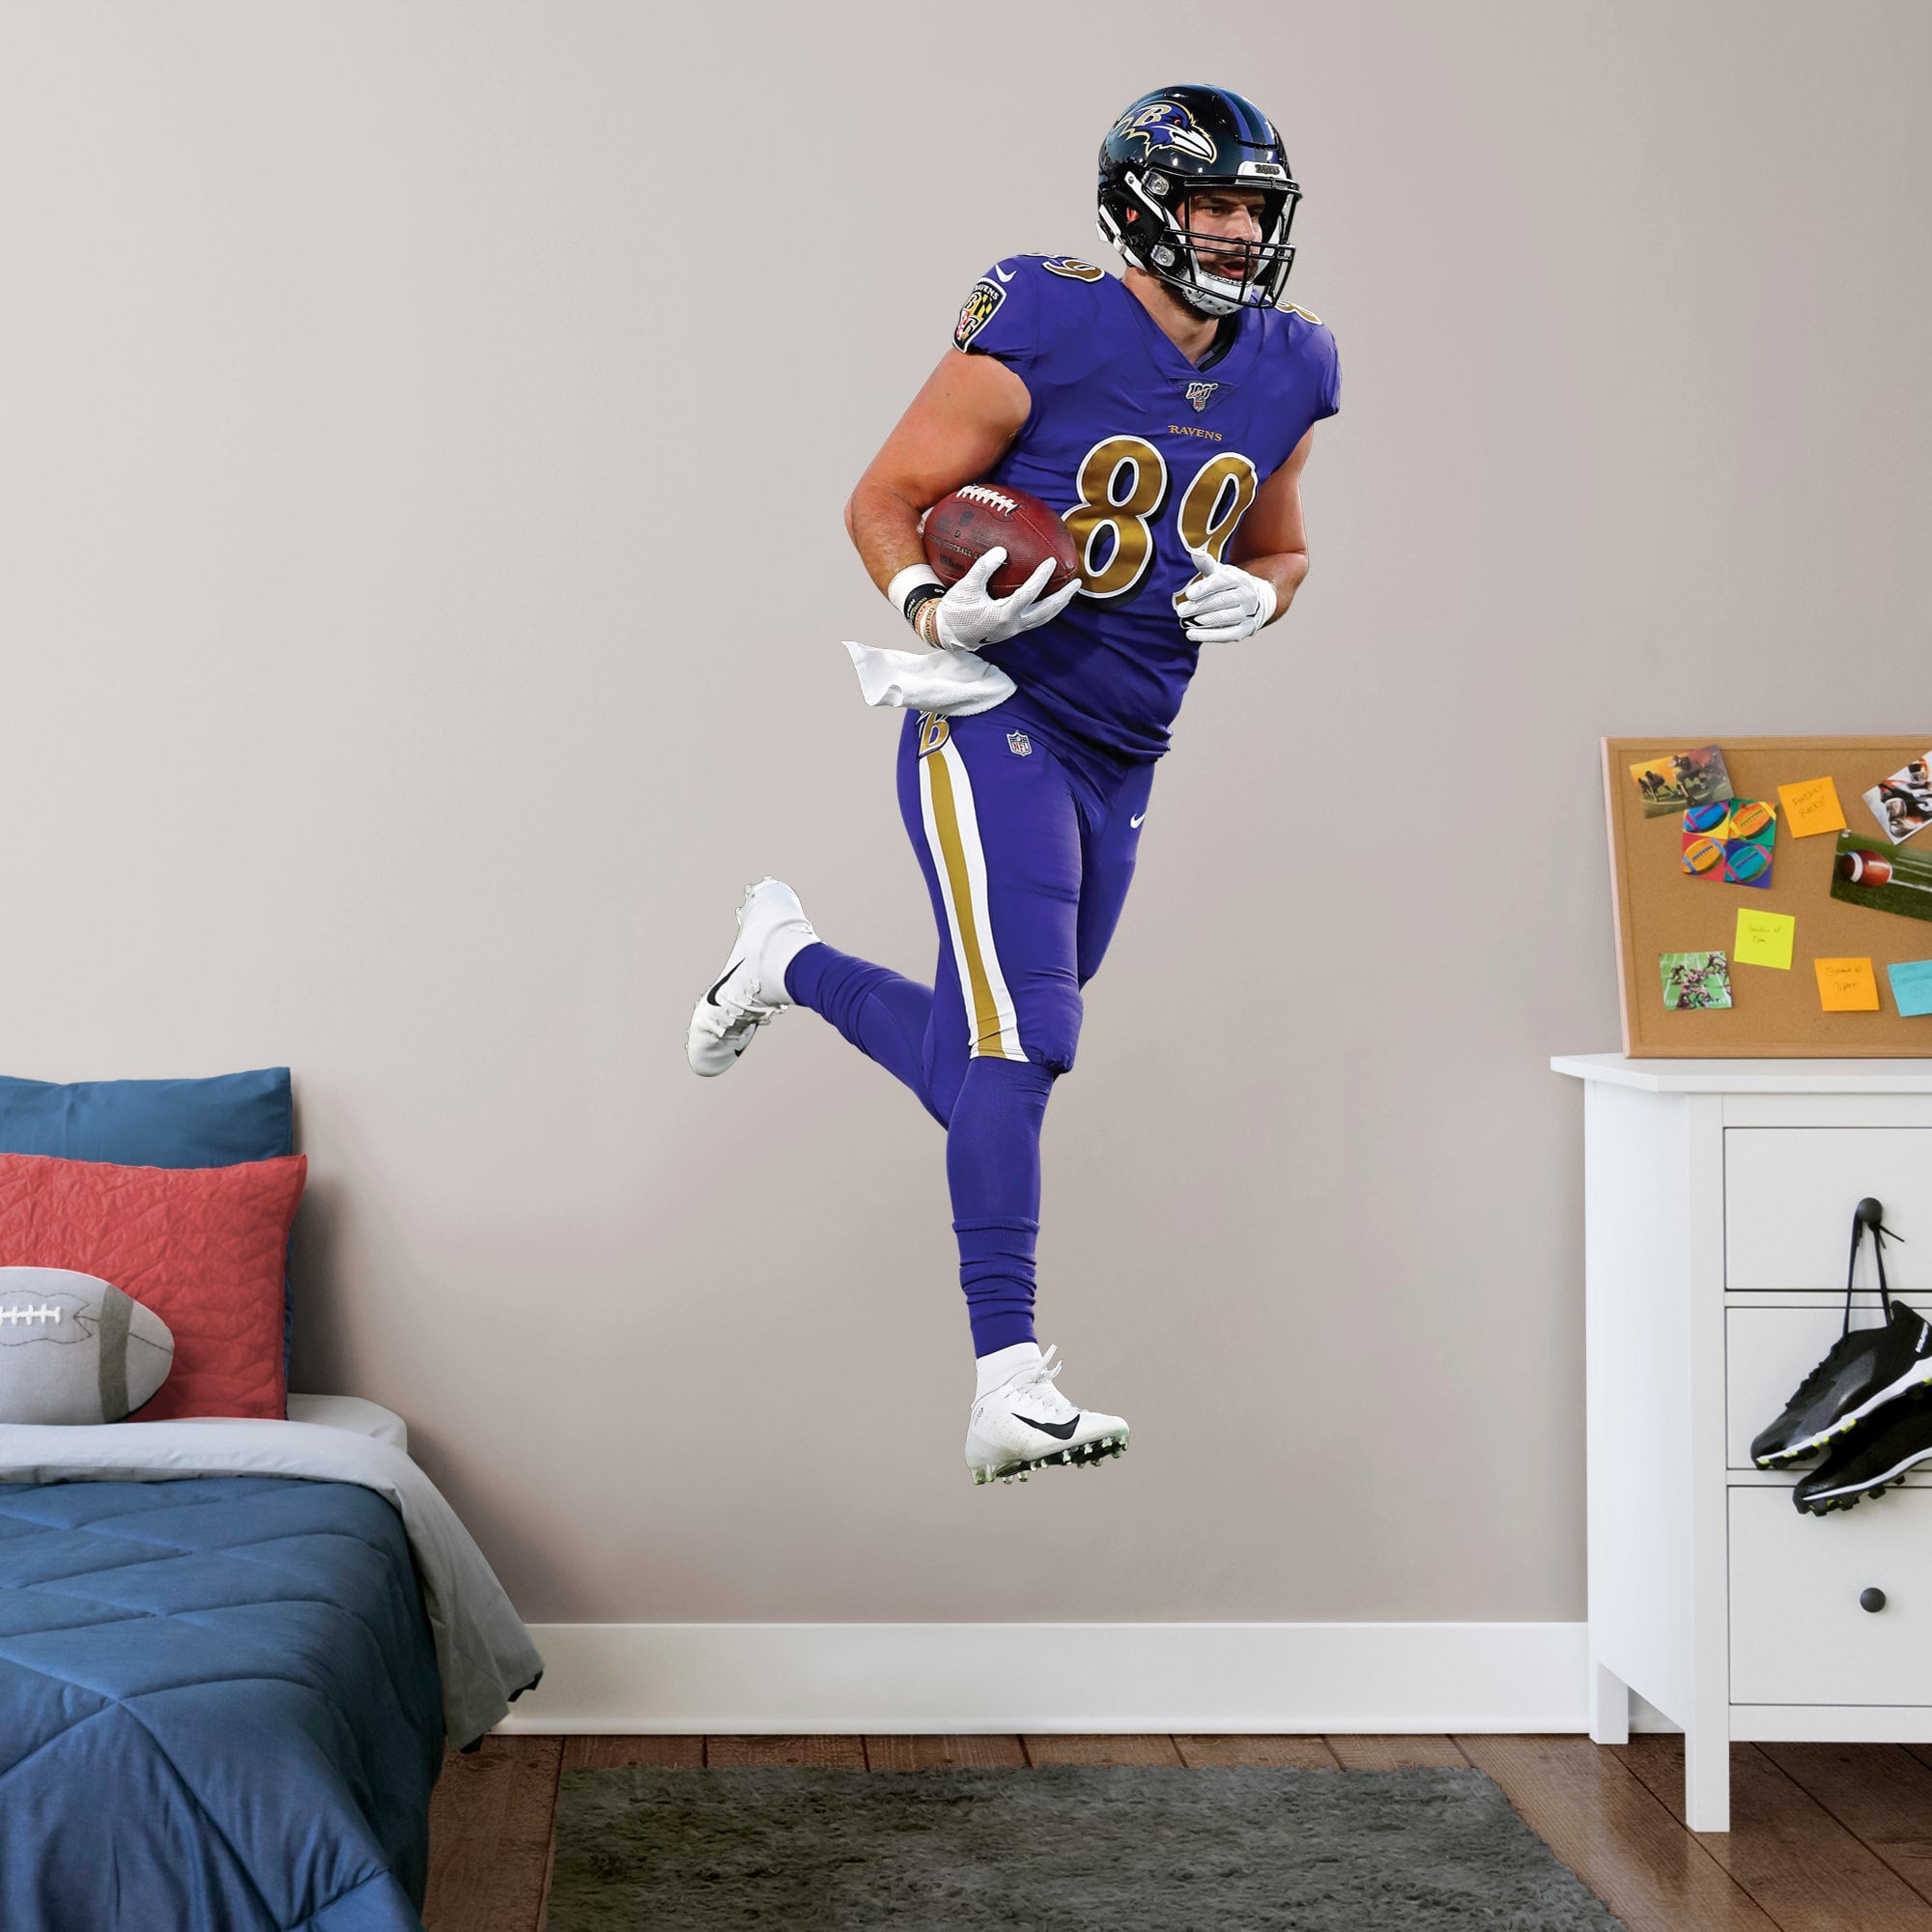 Mark Andrews for Baltimore Ravens - Officially Licensed NFL Removable Wall Decal Life-Size Athlete + 2 Decals (37"W x 78"H) by F